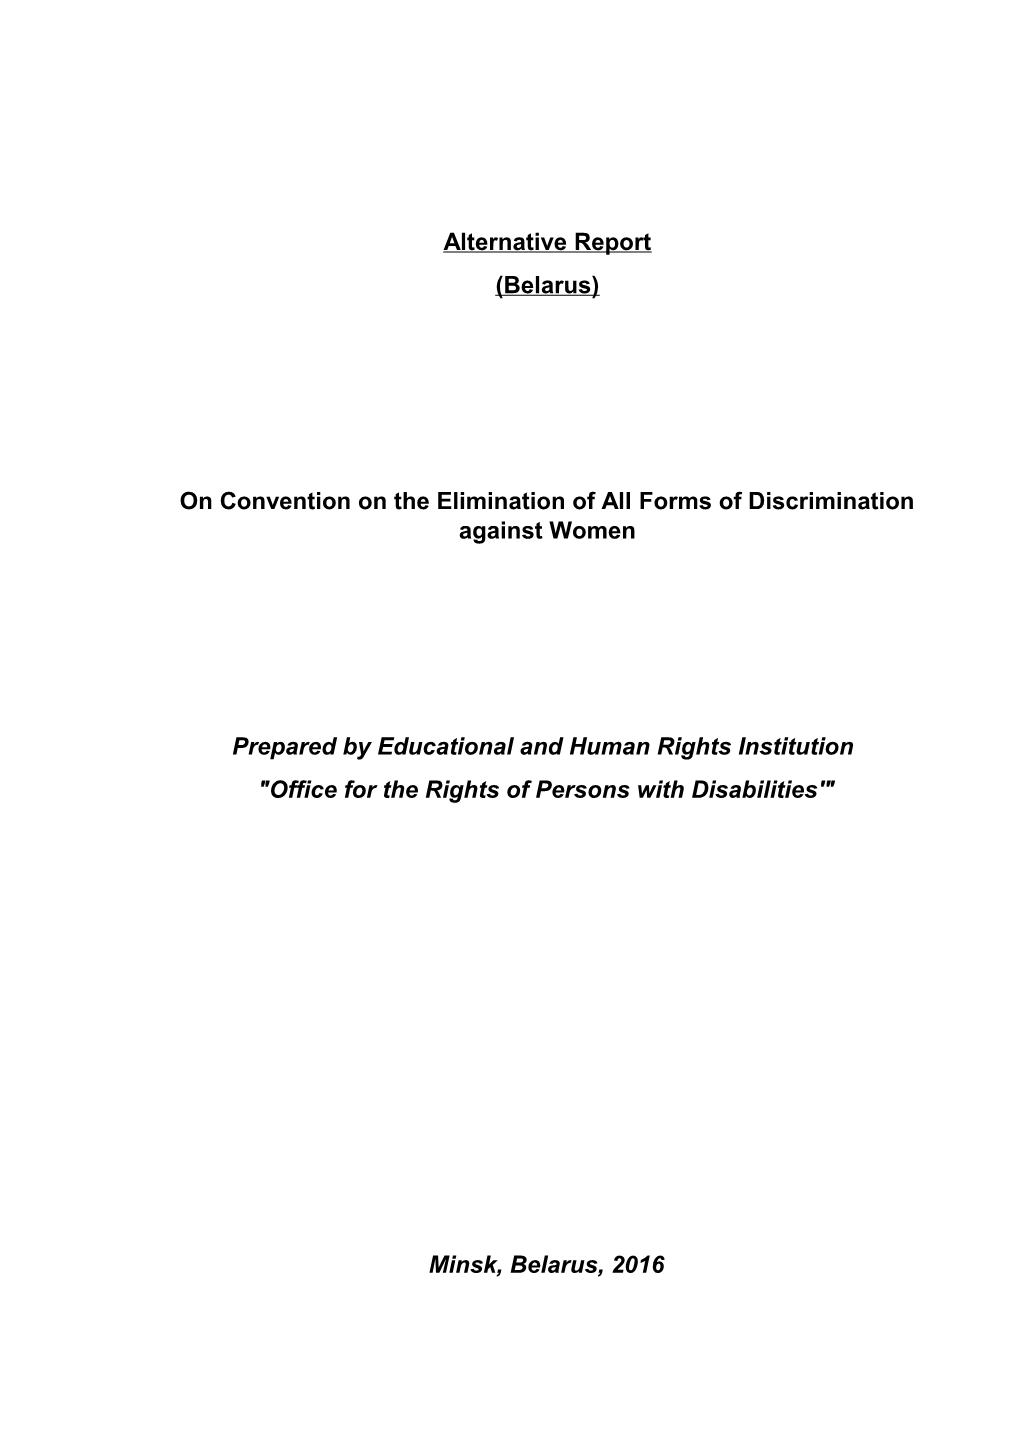 On Convention on the Elimination of All Forms of Discrimination Against Women